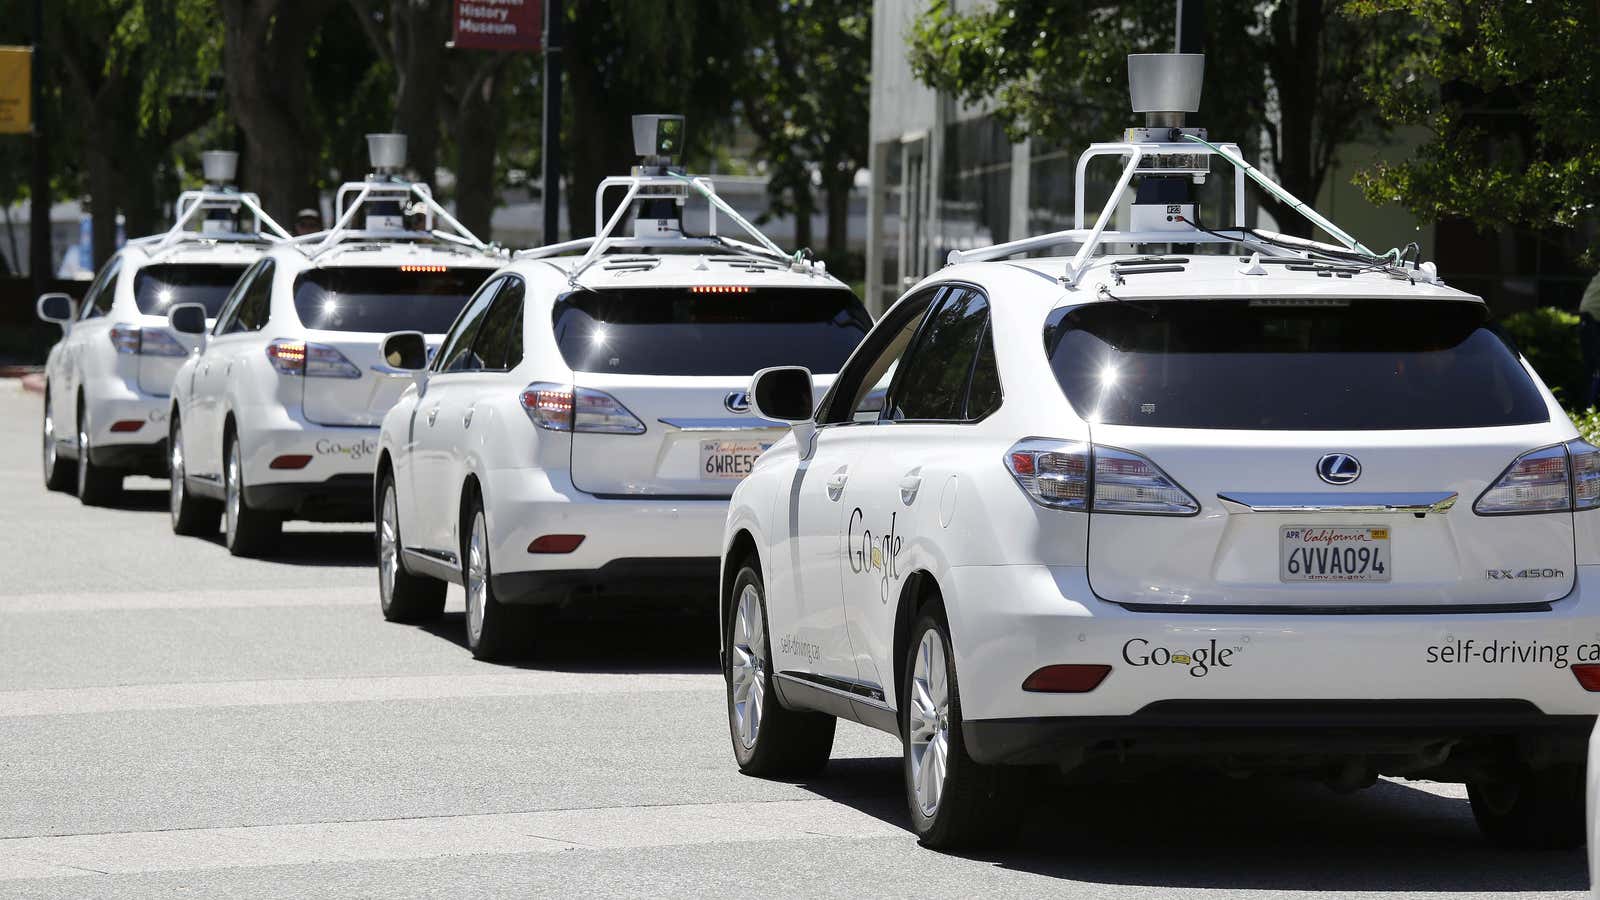 Depending on your definition of self-driving cars, they’re either already here, coming soon, or a distant aspiration.